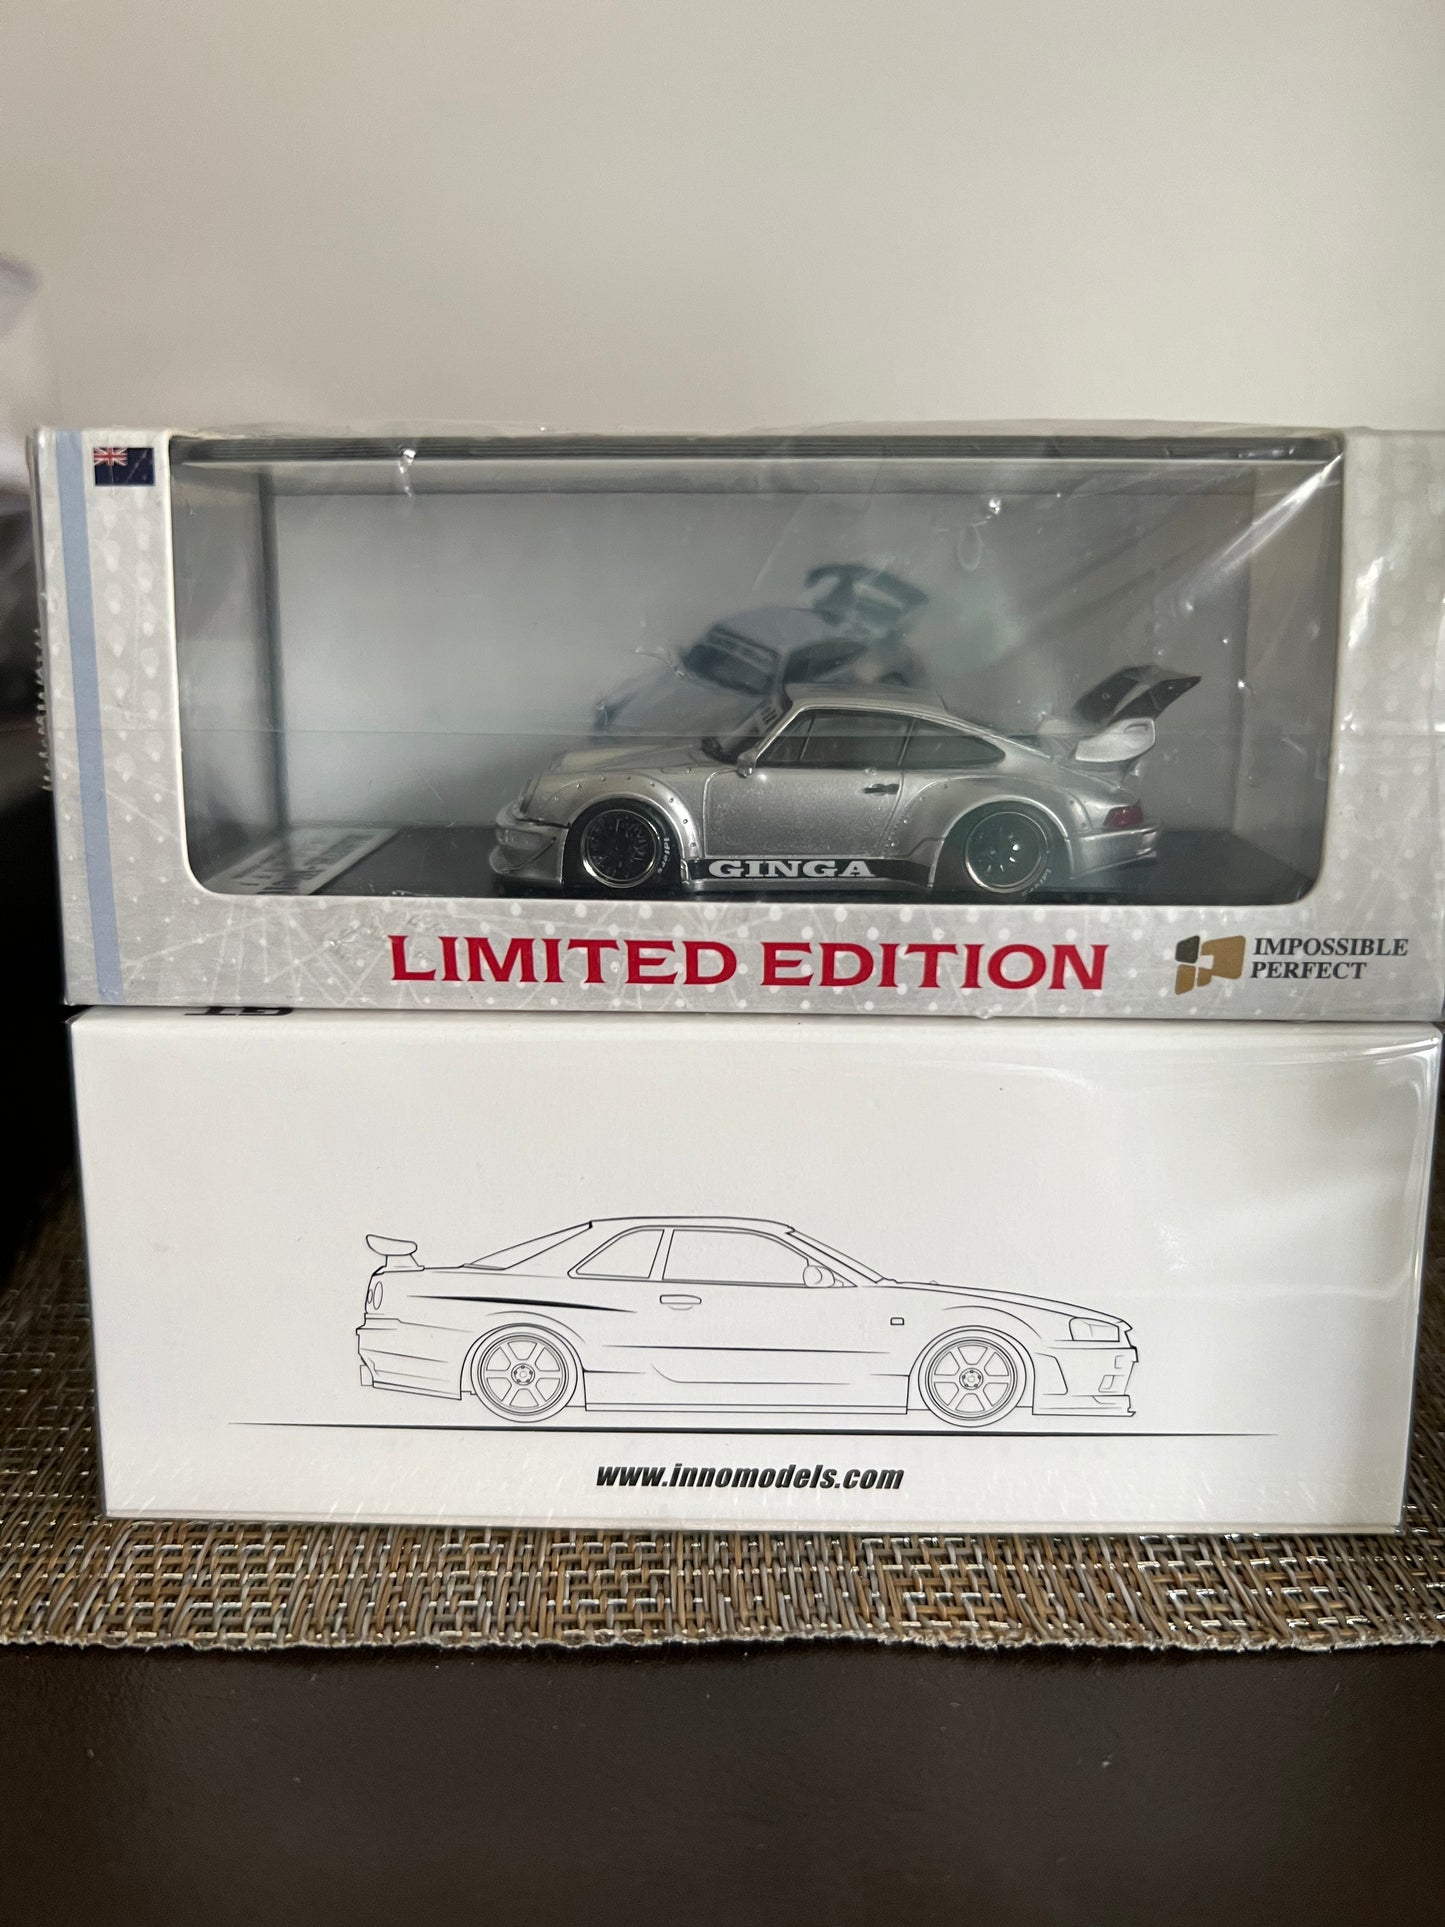 Impossible perfect Porsche 911 resin